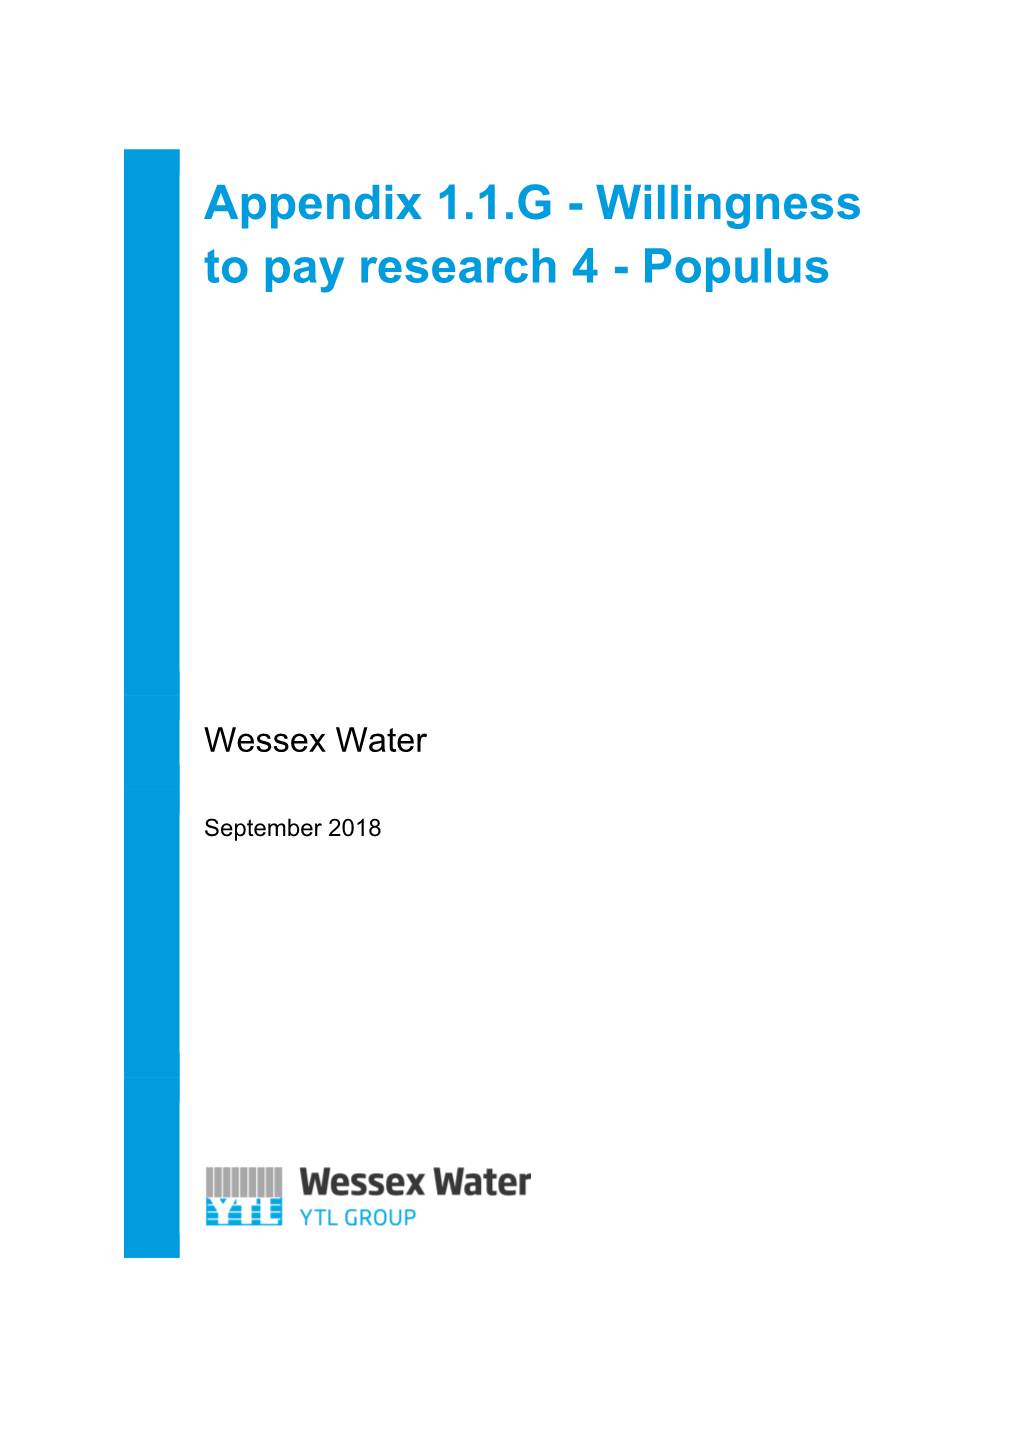 Appendix 1.1.G - Willingness to Pay Research 4 - Populus